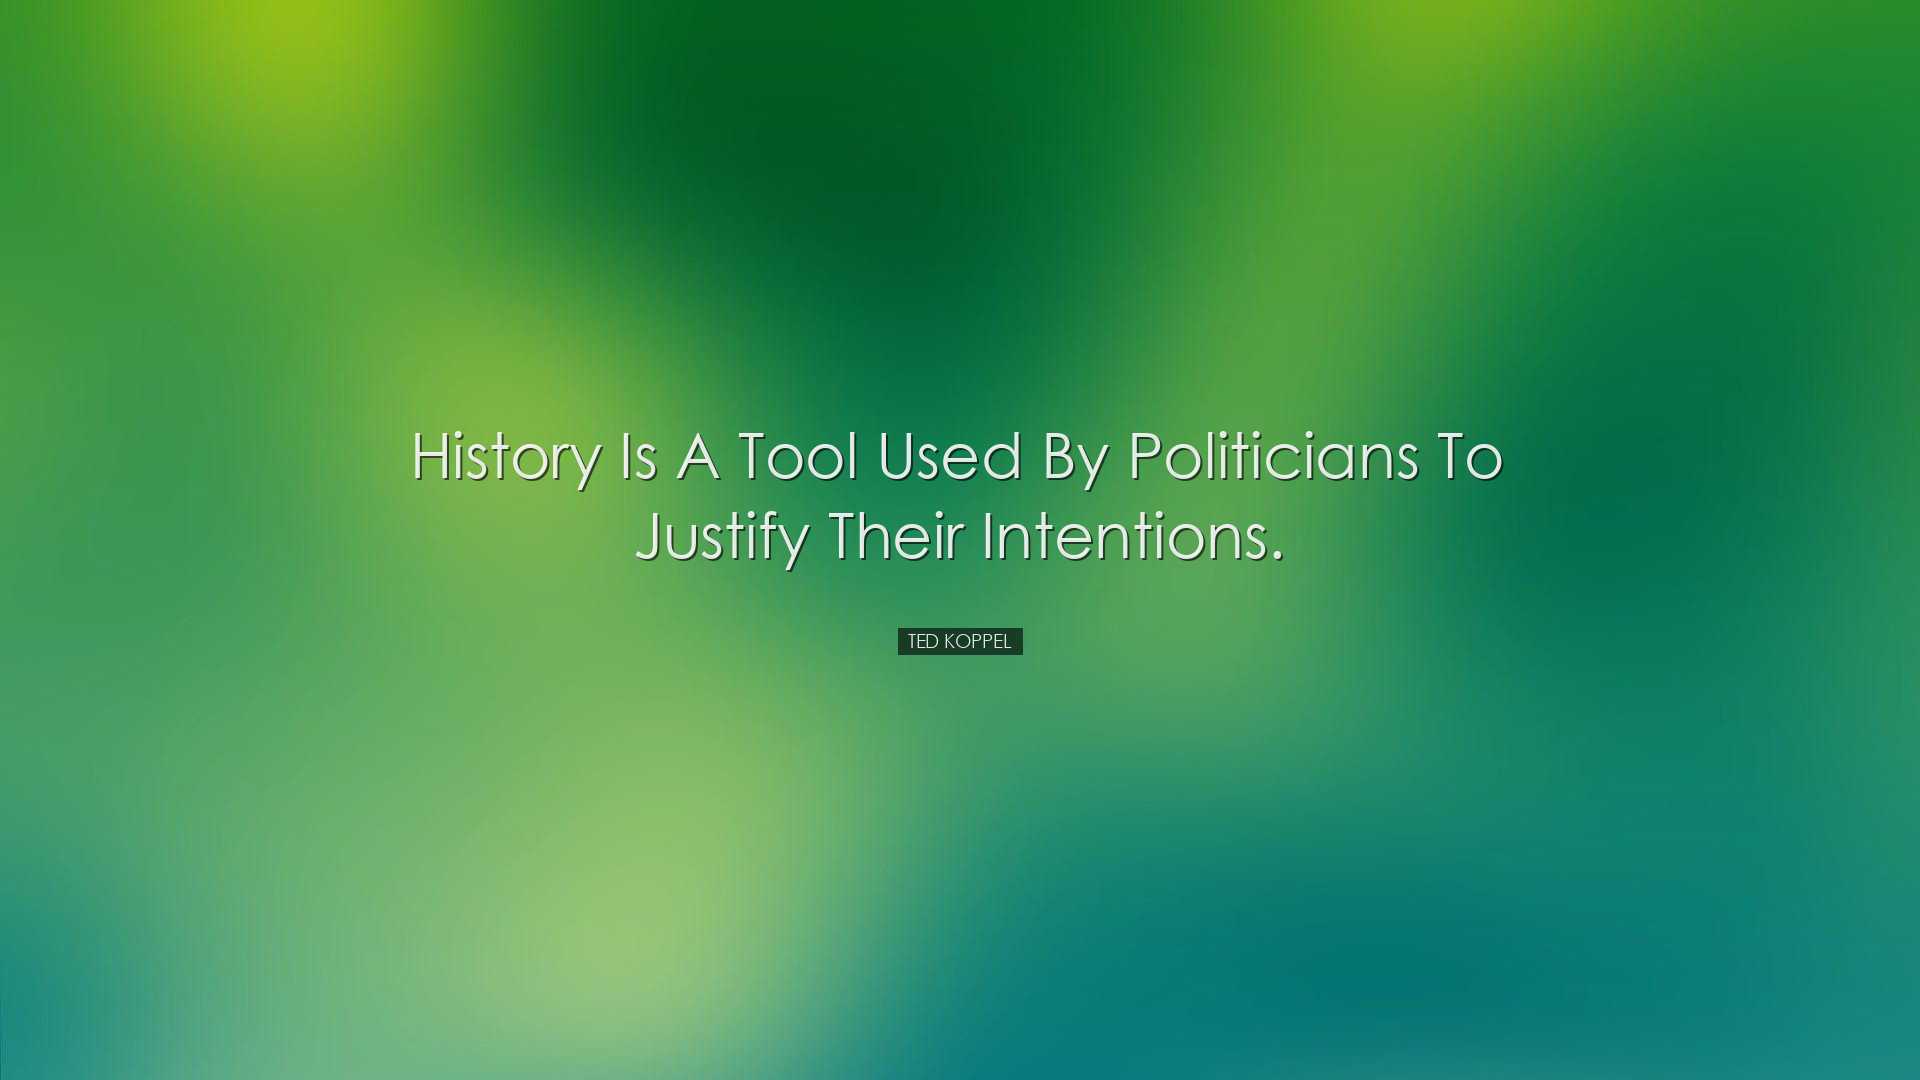 History is a tool used by politicians to justify their intentions.